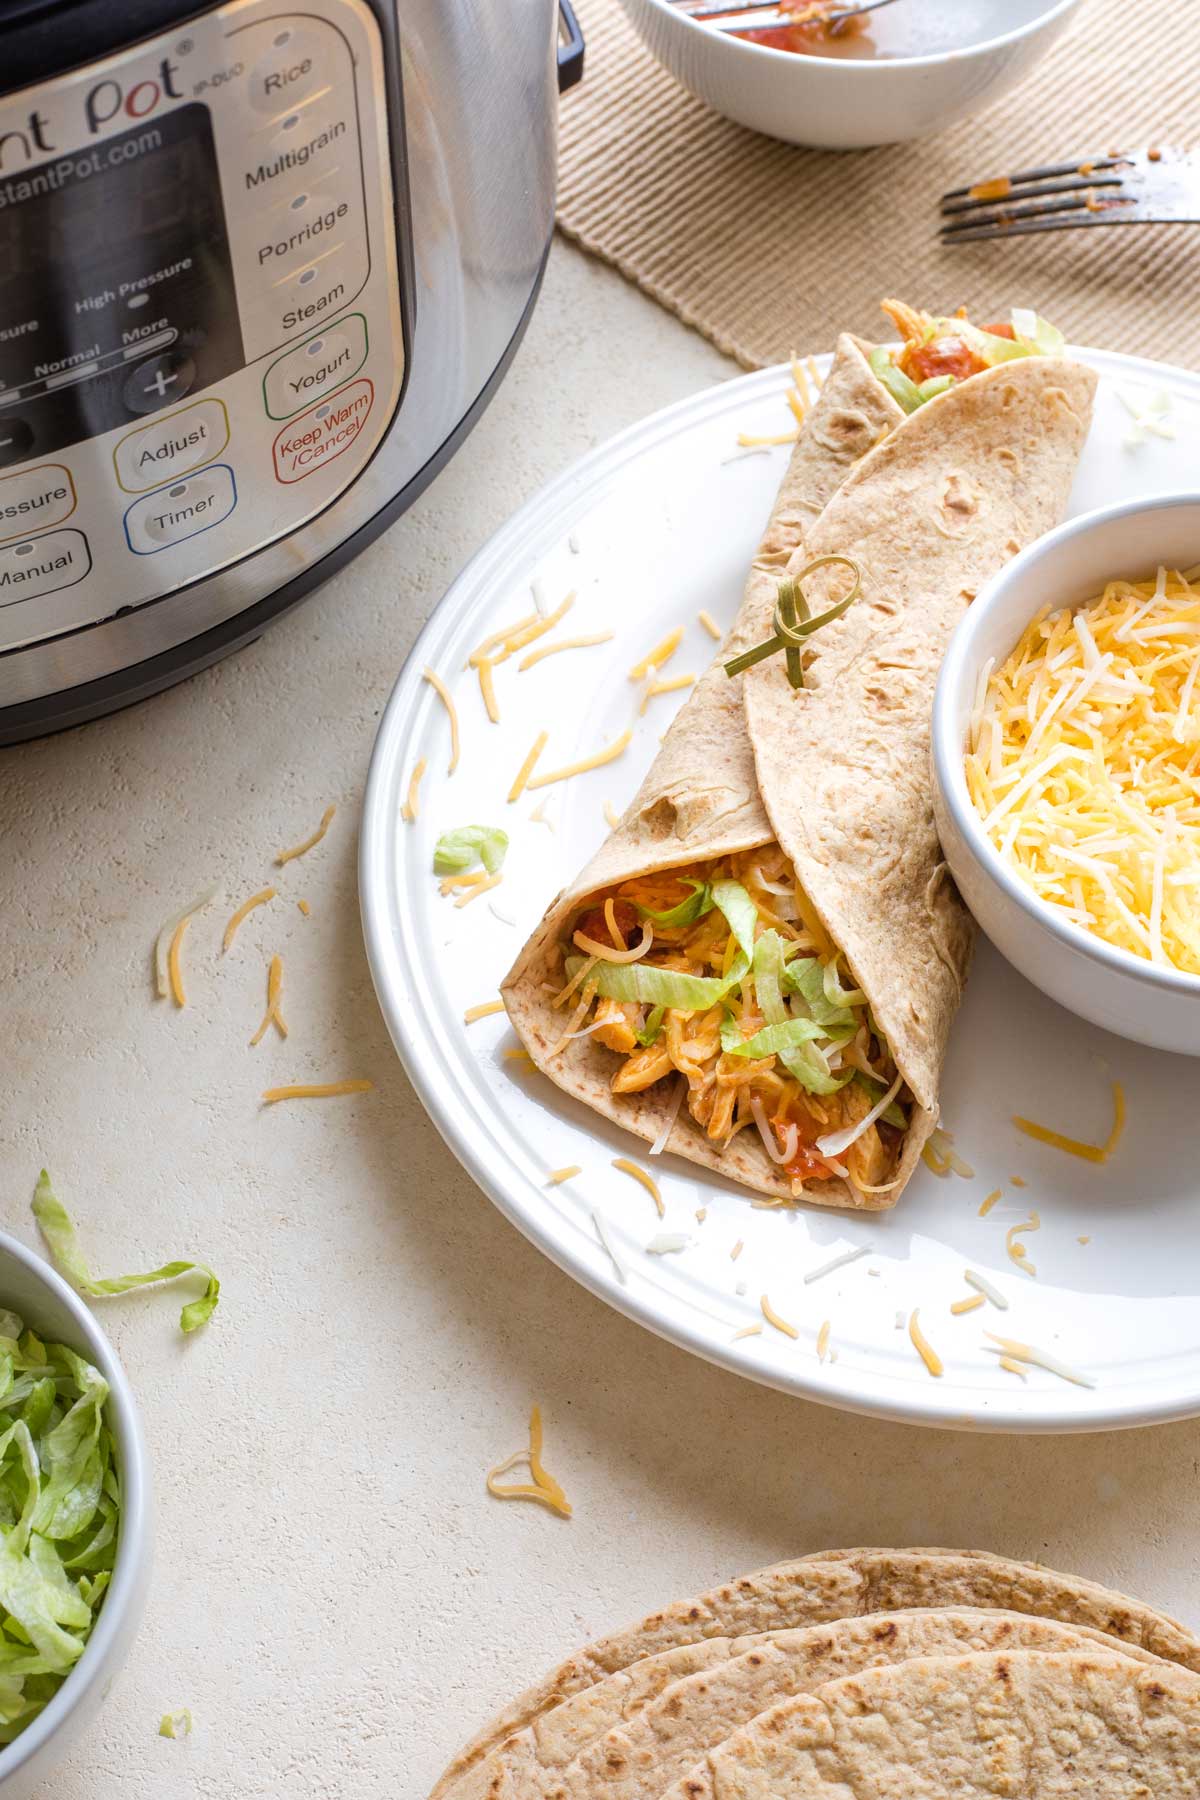 Soft chicken taco rolled up on plate nest to bowl of cheese with tortillas and Instant Pot surrounding.